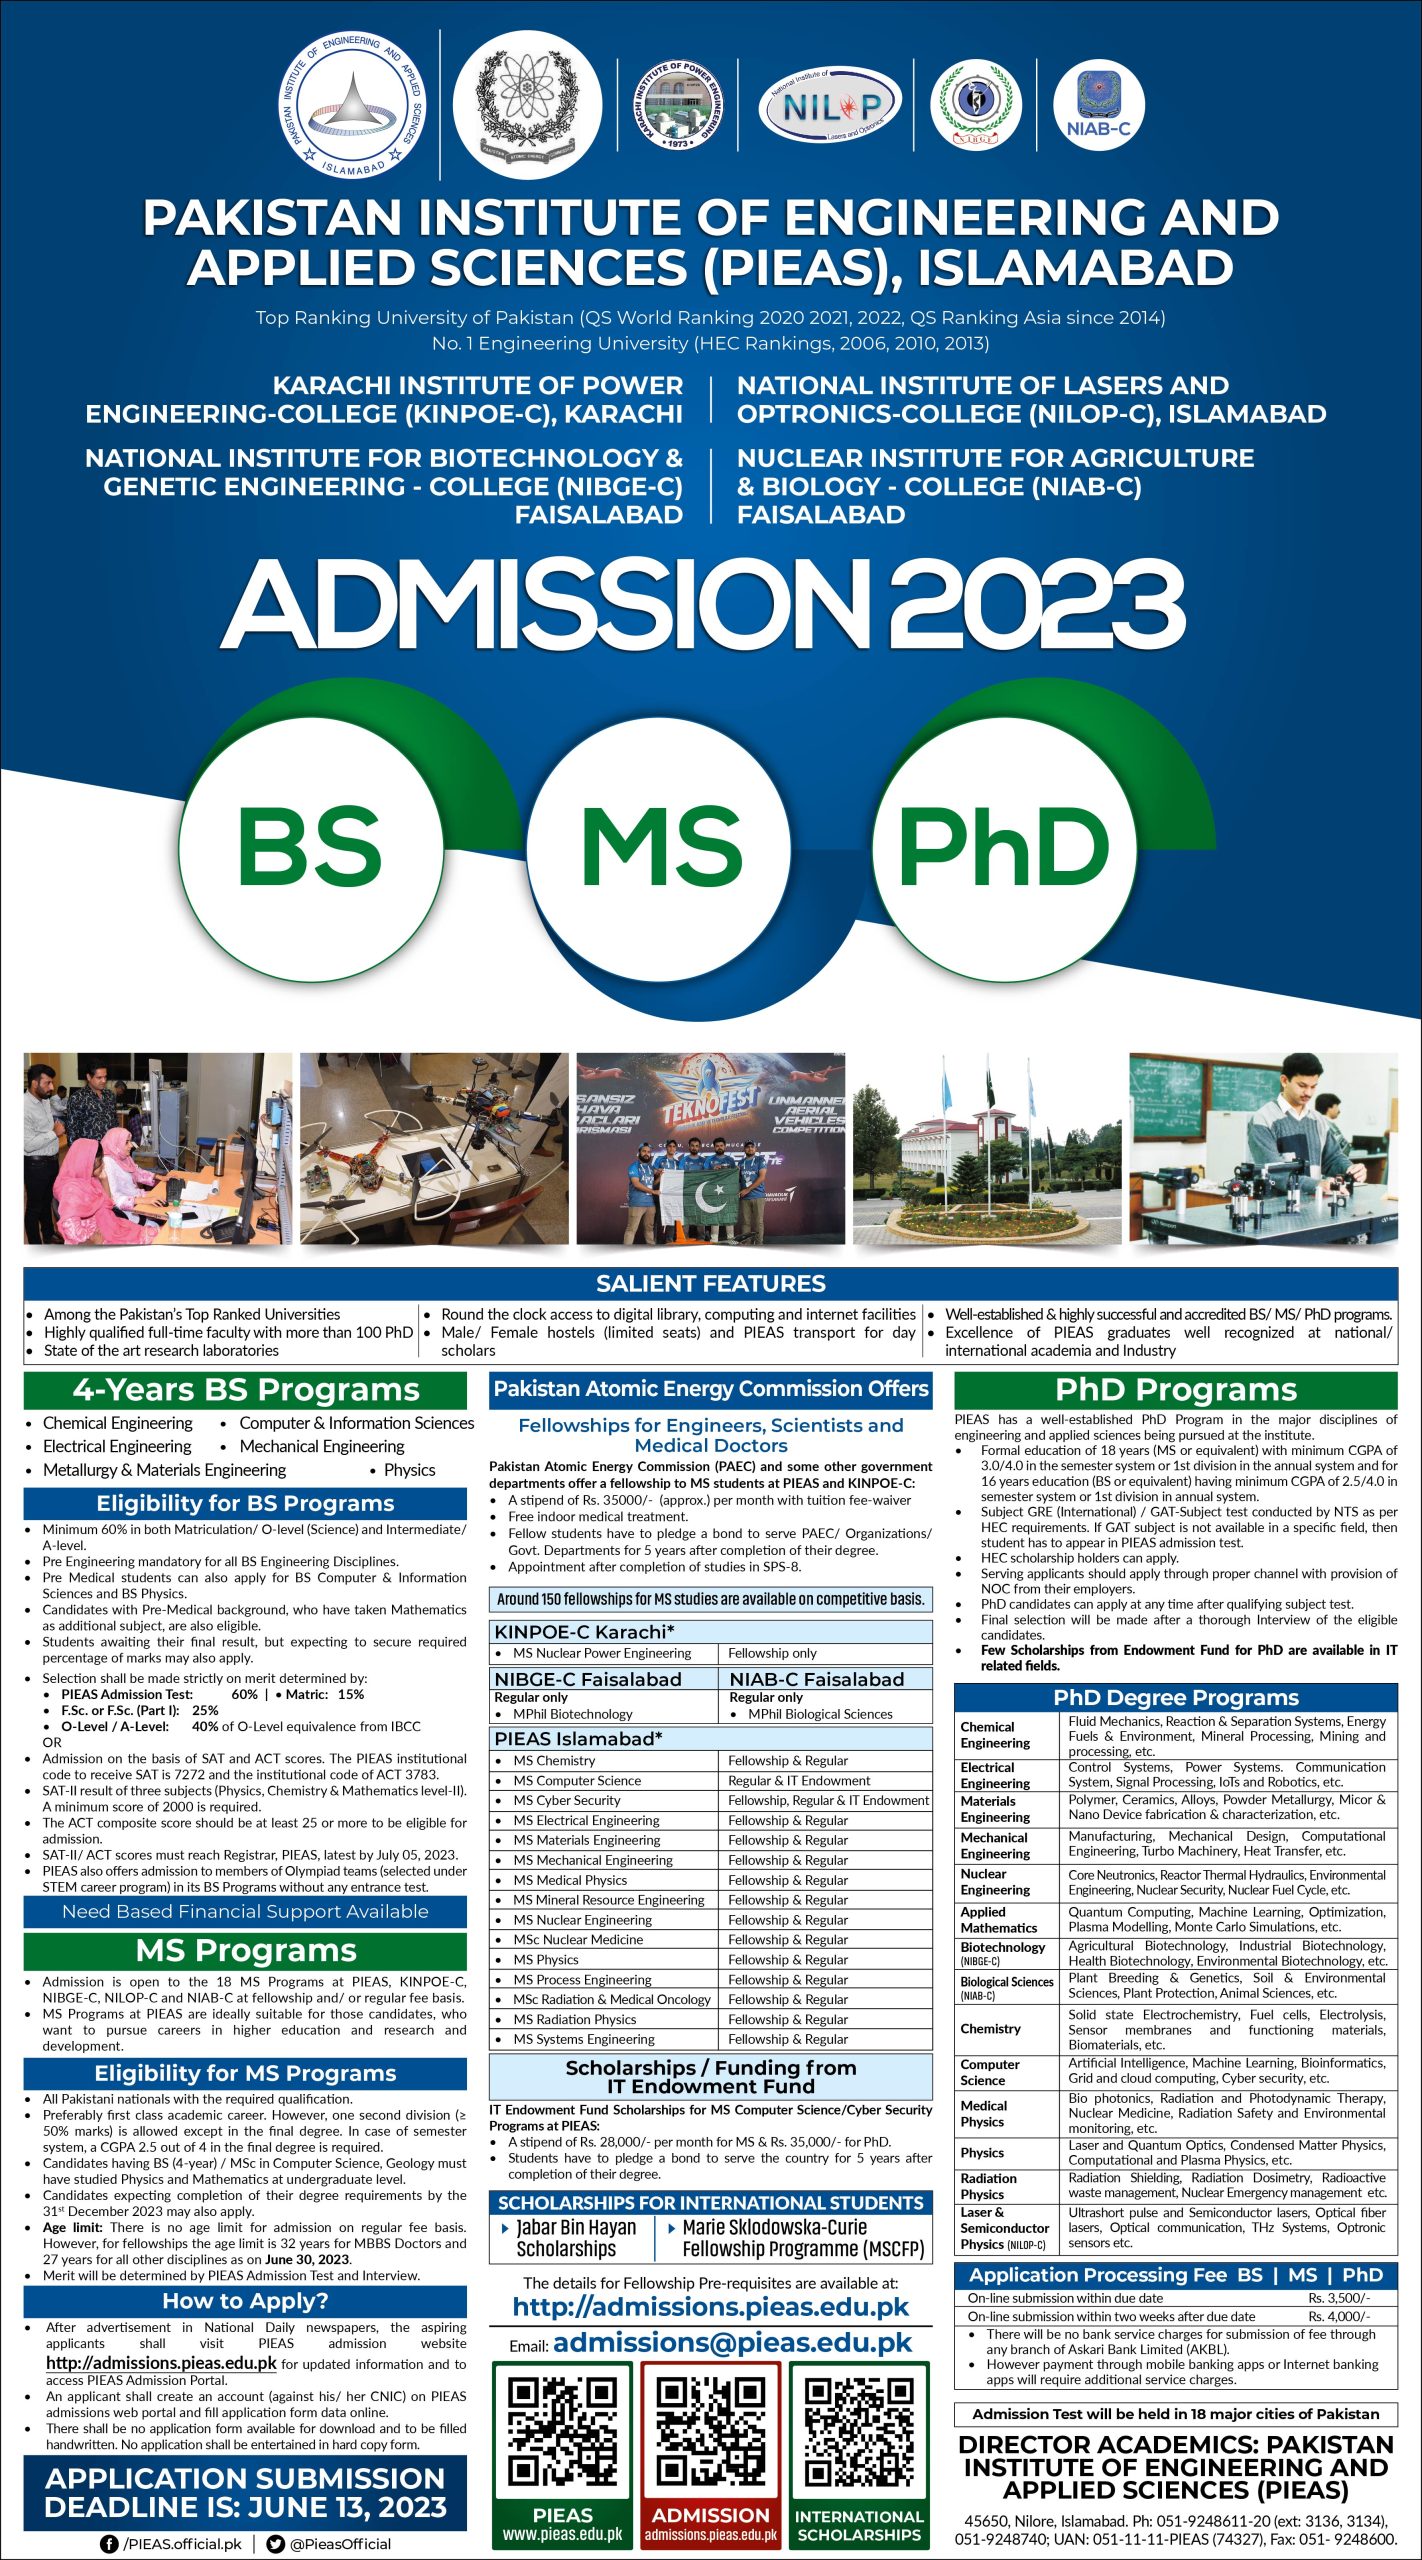 PIEAS Islamabad Admissions 2023 of BS MS and PhD